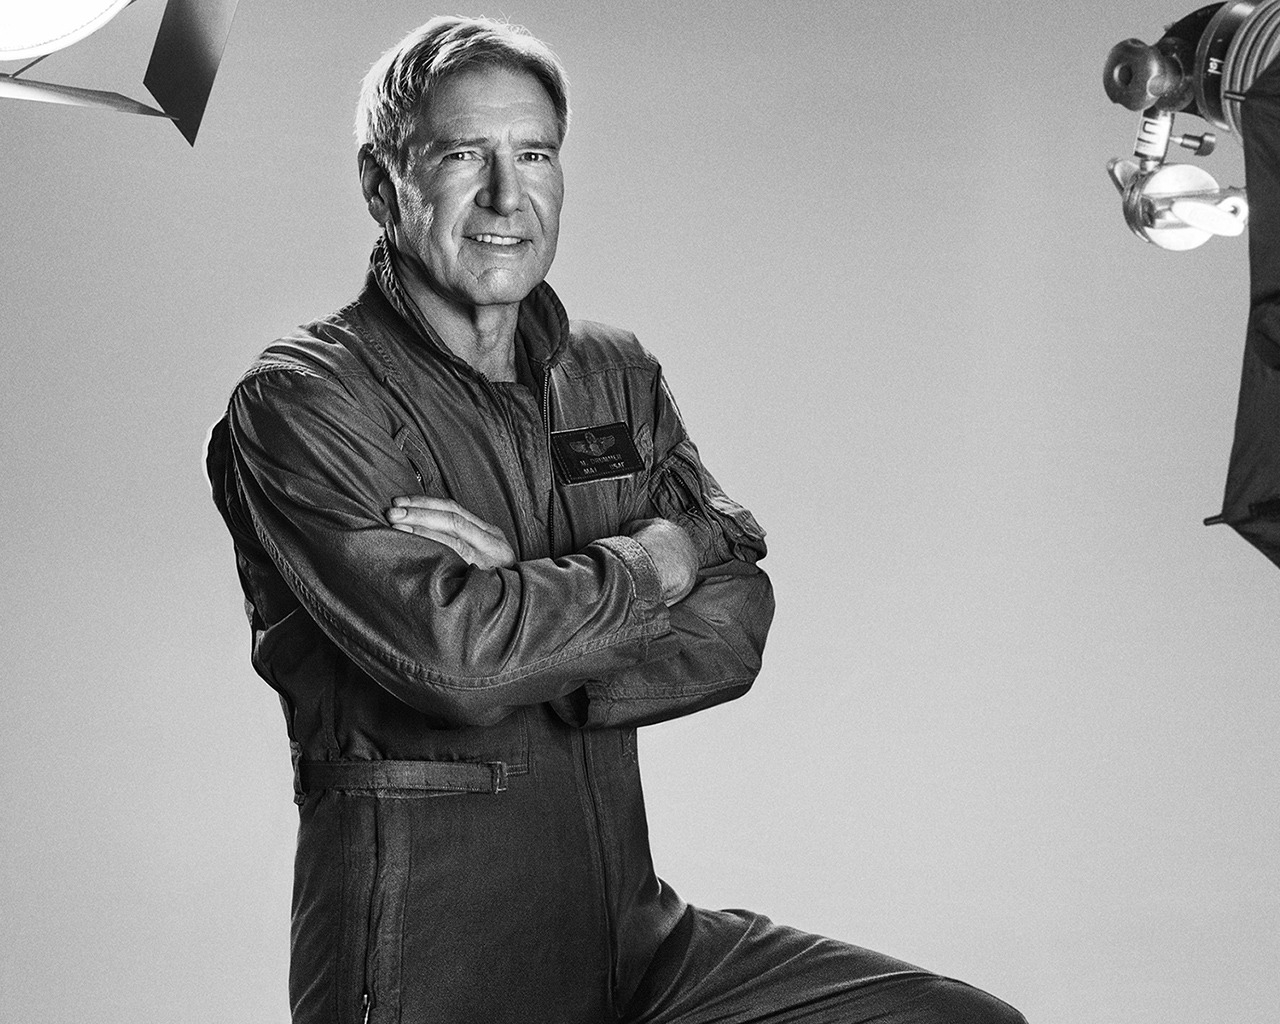 Harrison Ford The Expendables 3 for 1280 x 1024 resolution